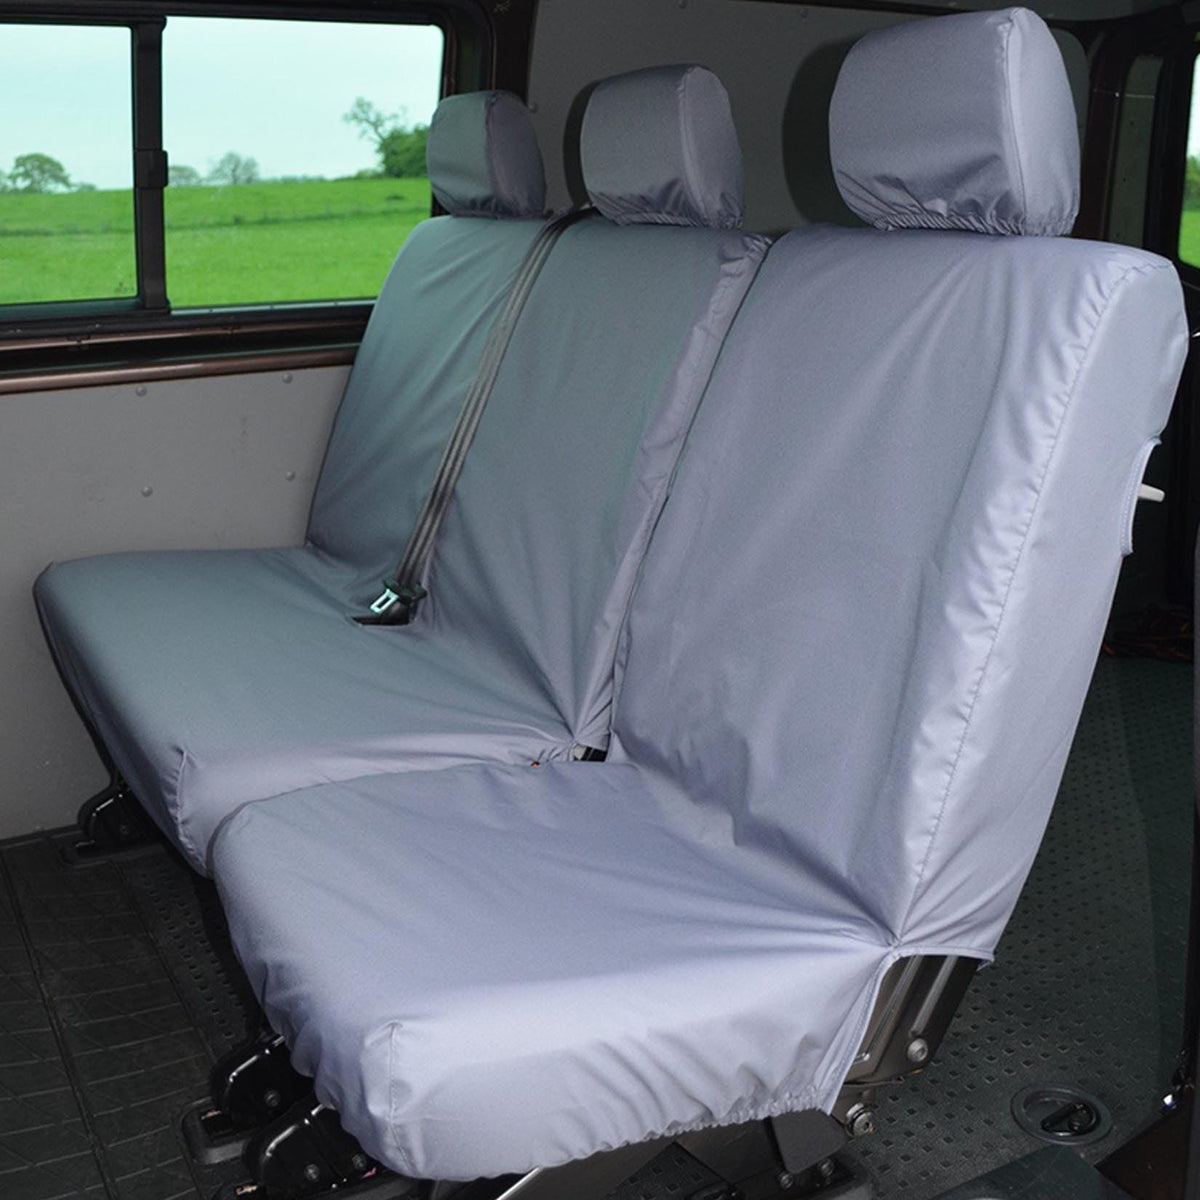 VW TRANSPORTER T5 T6 2010 ON REAR SINGLE AND DOUBLE PASSENGER SEAT COVERS – GREY - Storm Xccessories2